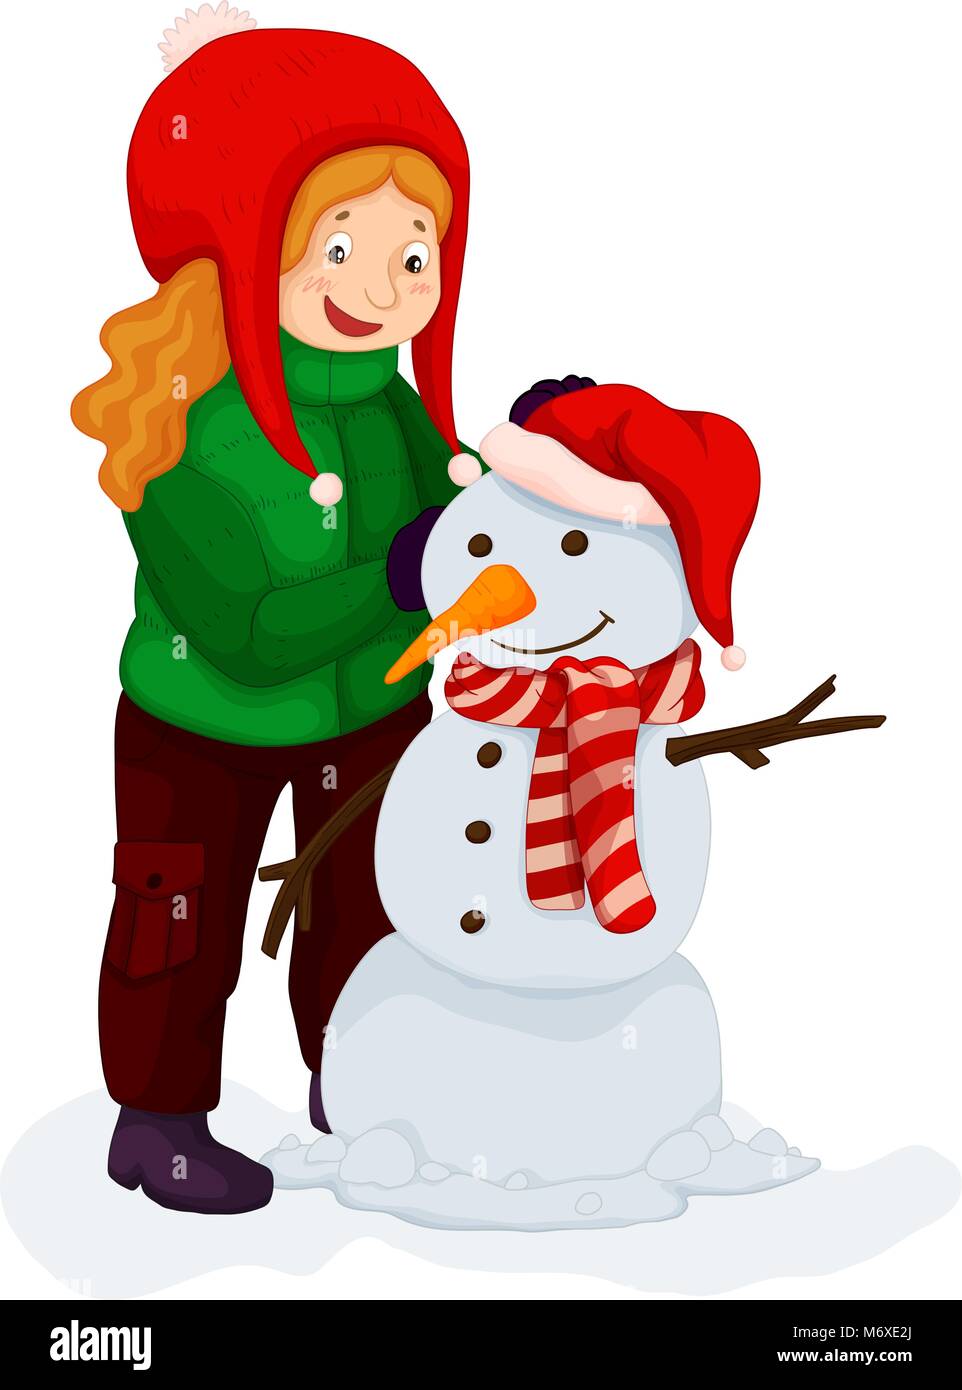 Girl playing with snowman illustration Stock Vector